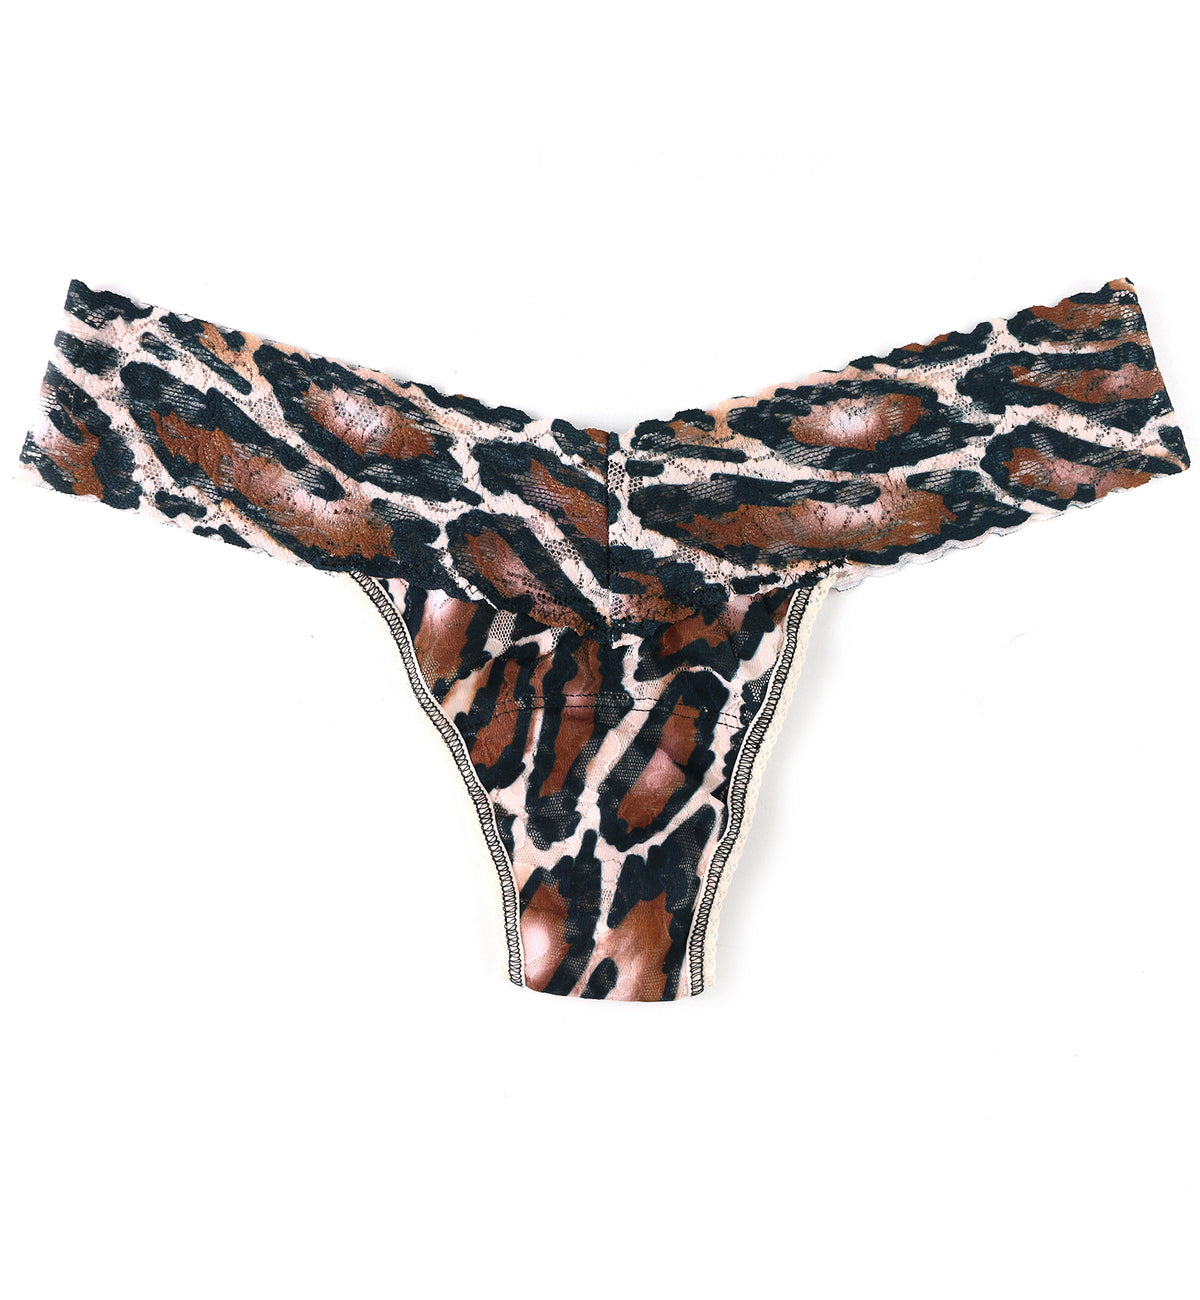 Hanky Panky Signature Lace Printed Low Rise Thong (PR4911P),Natural Rhythm - Natural Rhythm,One Size